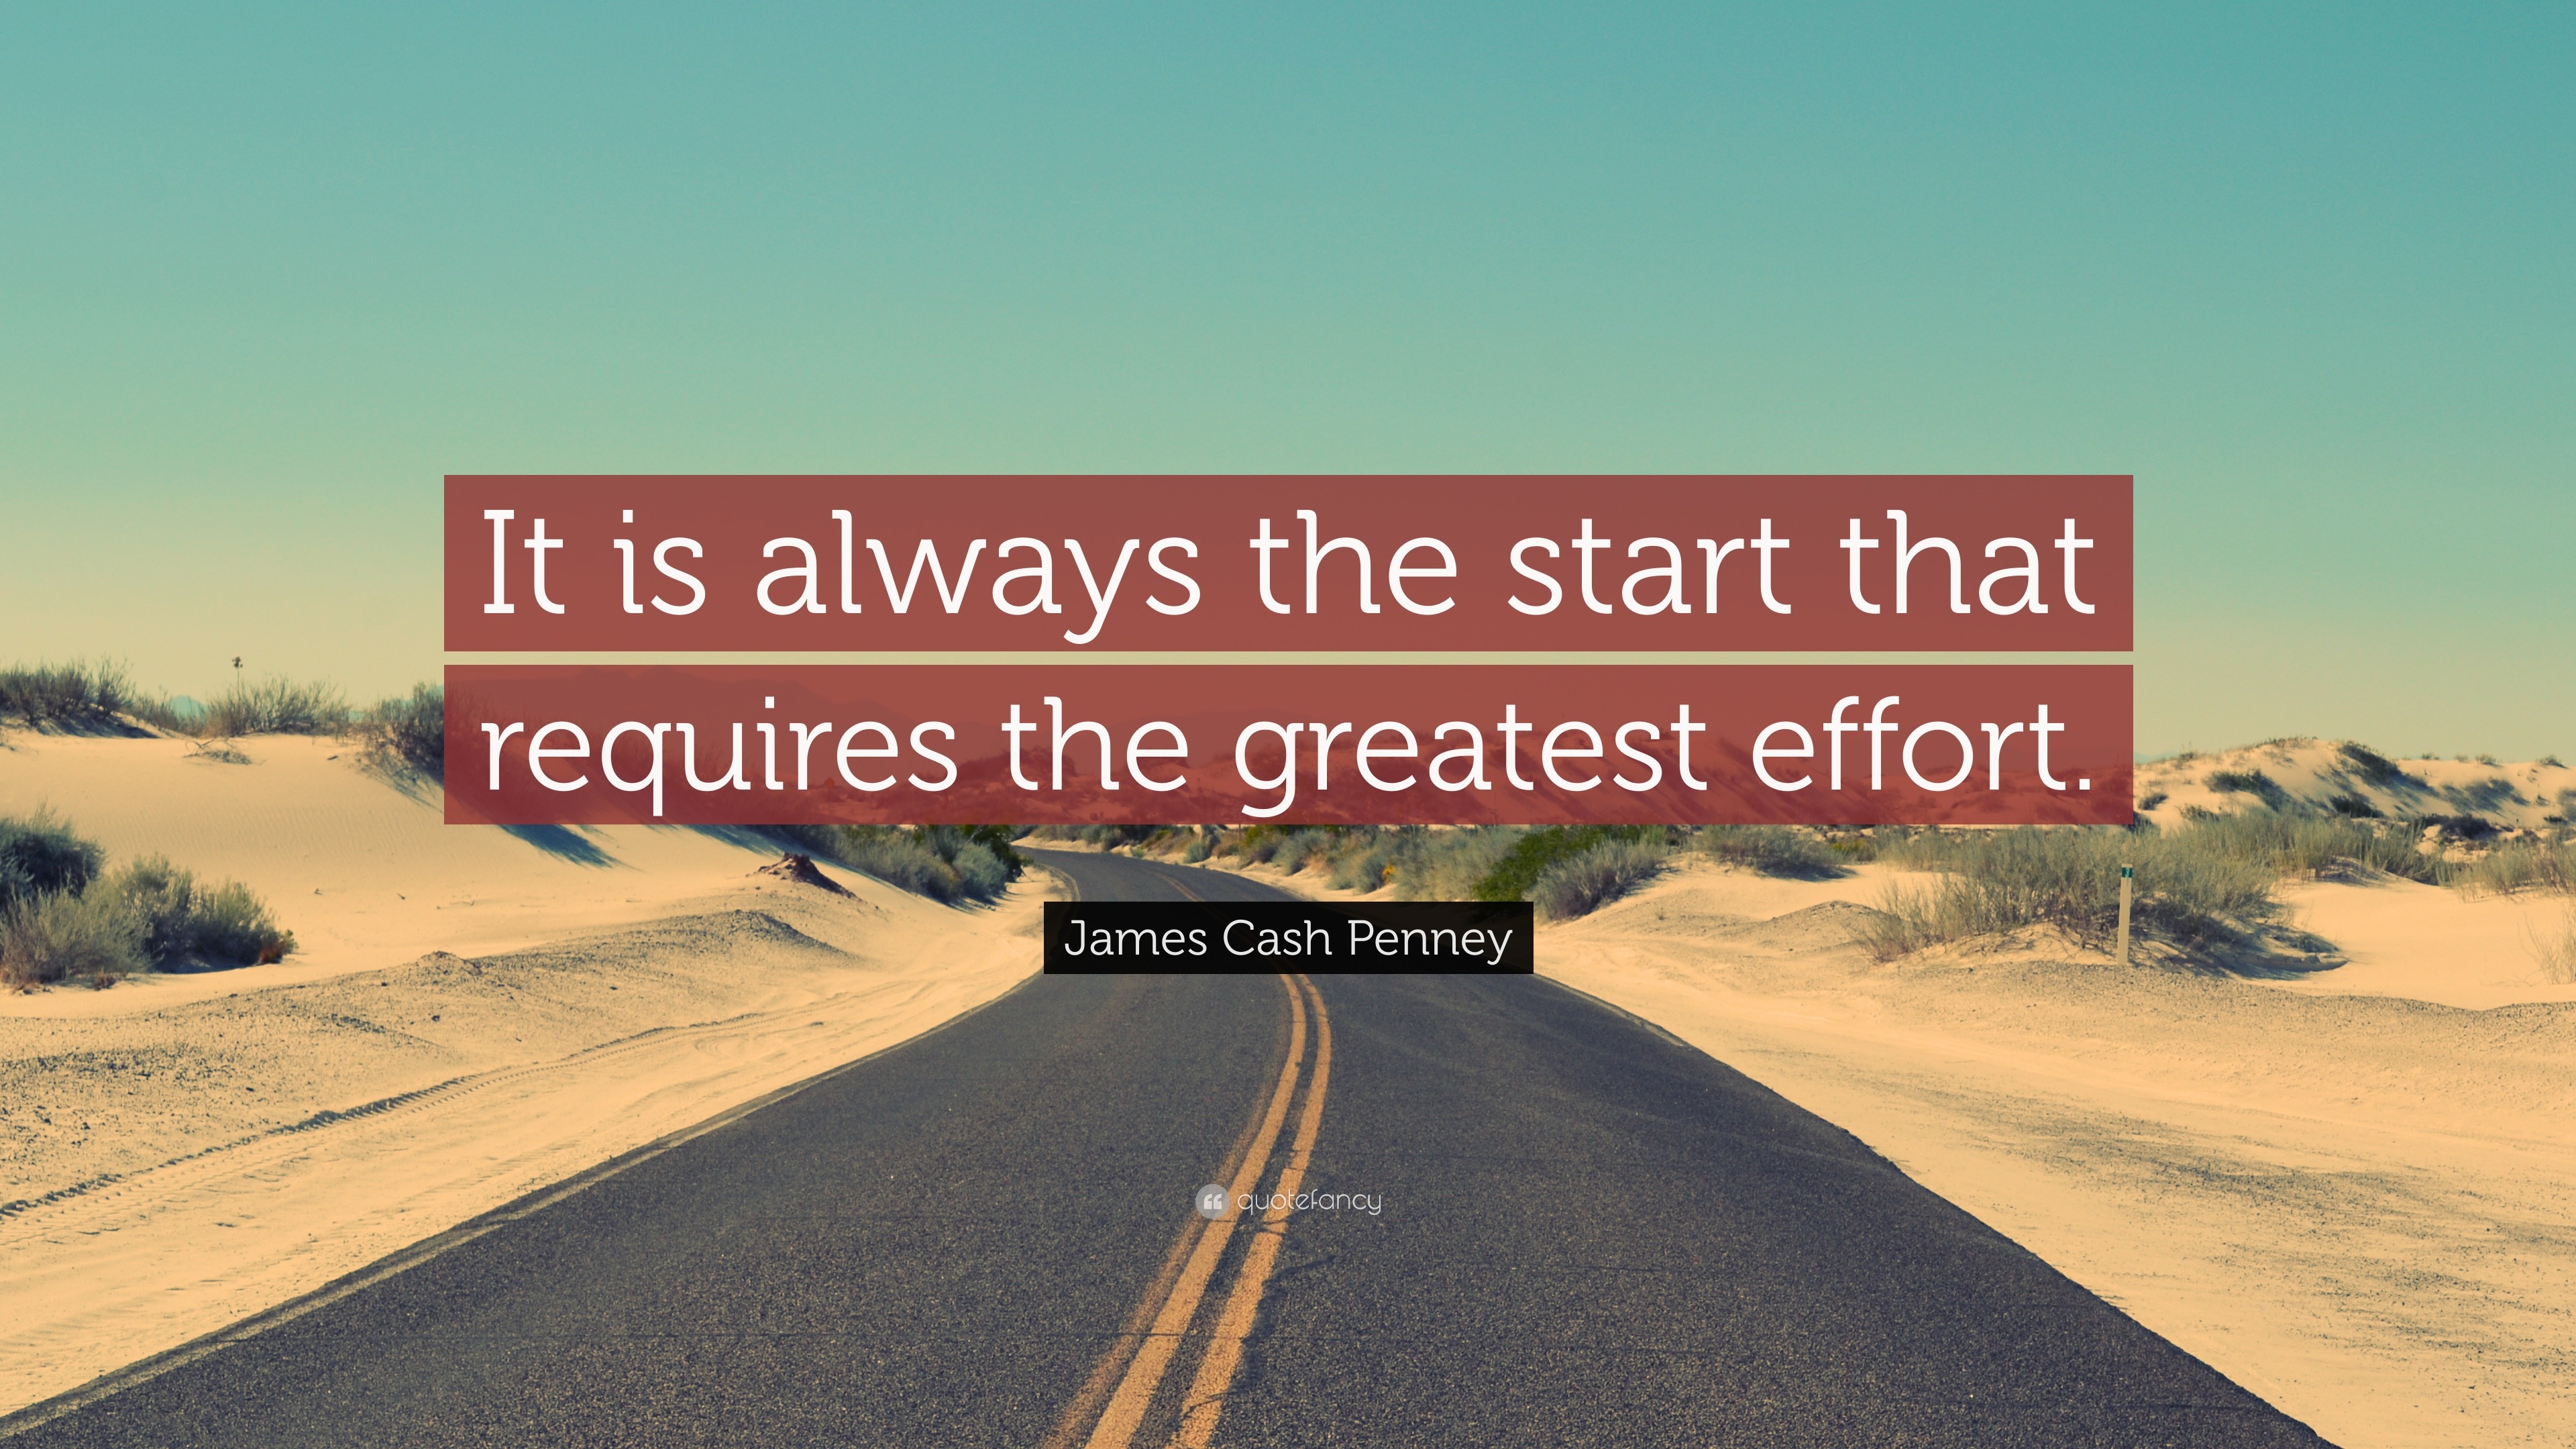 James Cash Penney Quote: “It is always the start that requires the ...